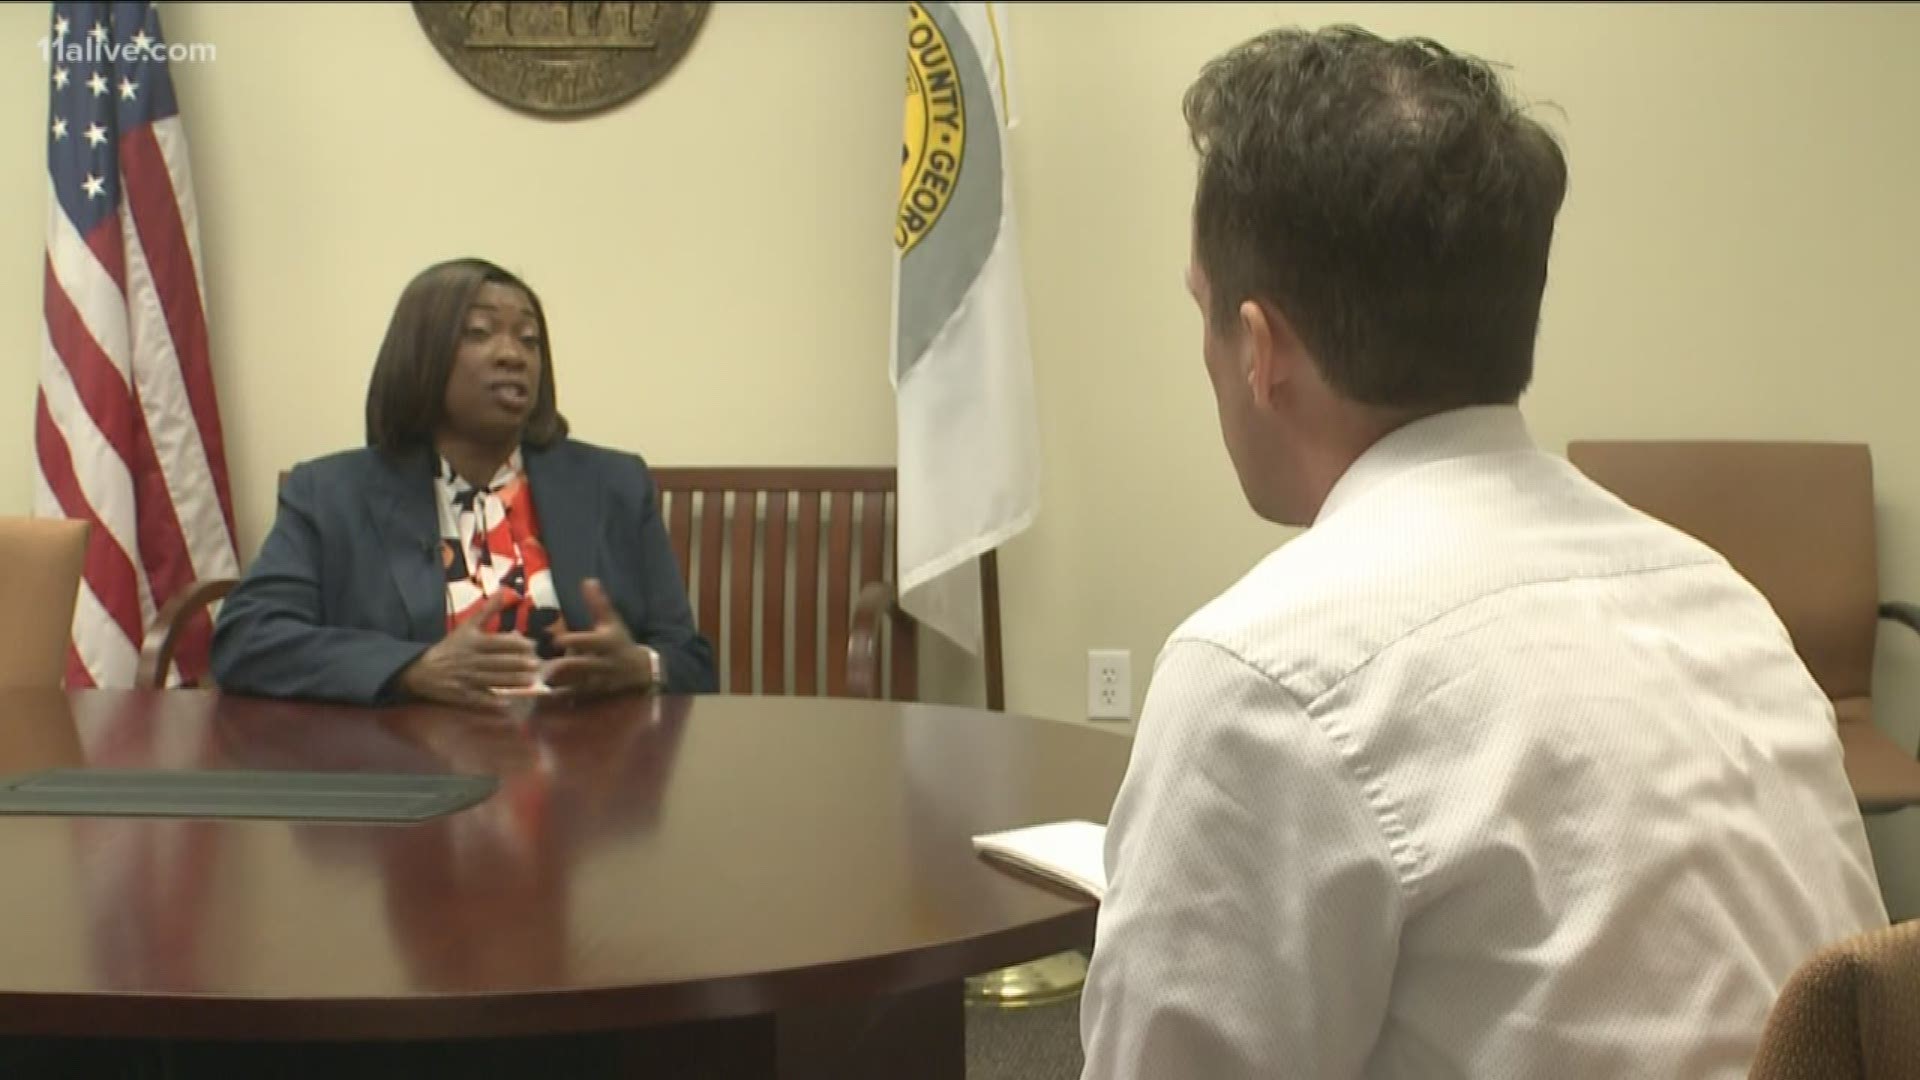 The DeKalb County Solicitor-General said nearly one-third of the 13,000 misdemeanor cases she prosecutes each year are domestic violence.